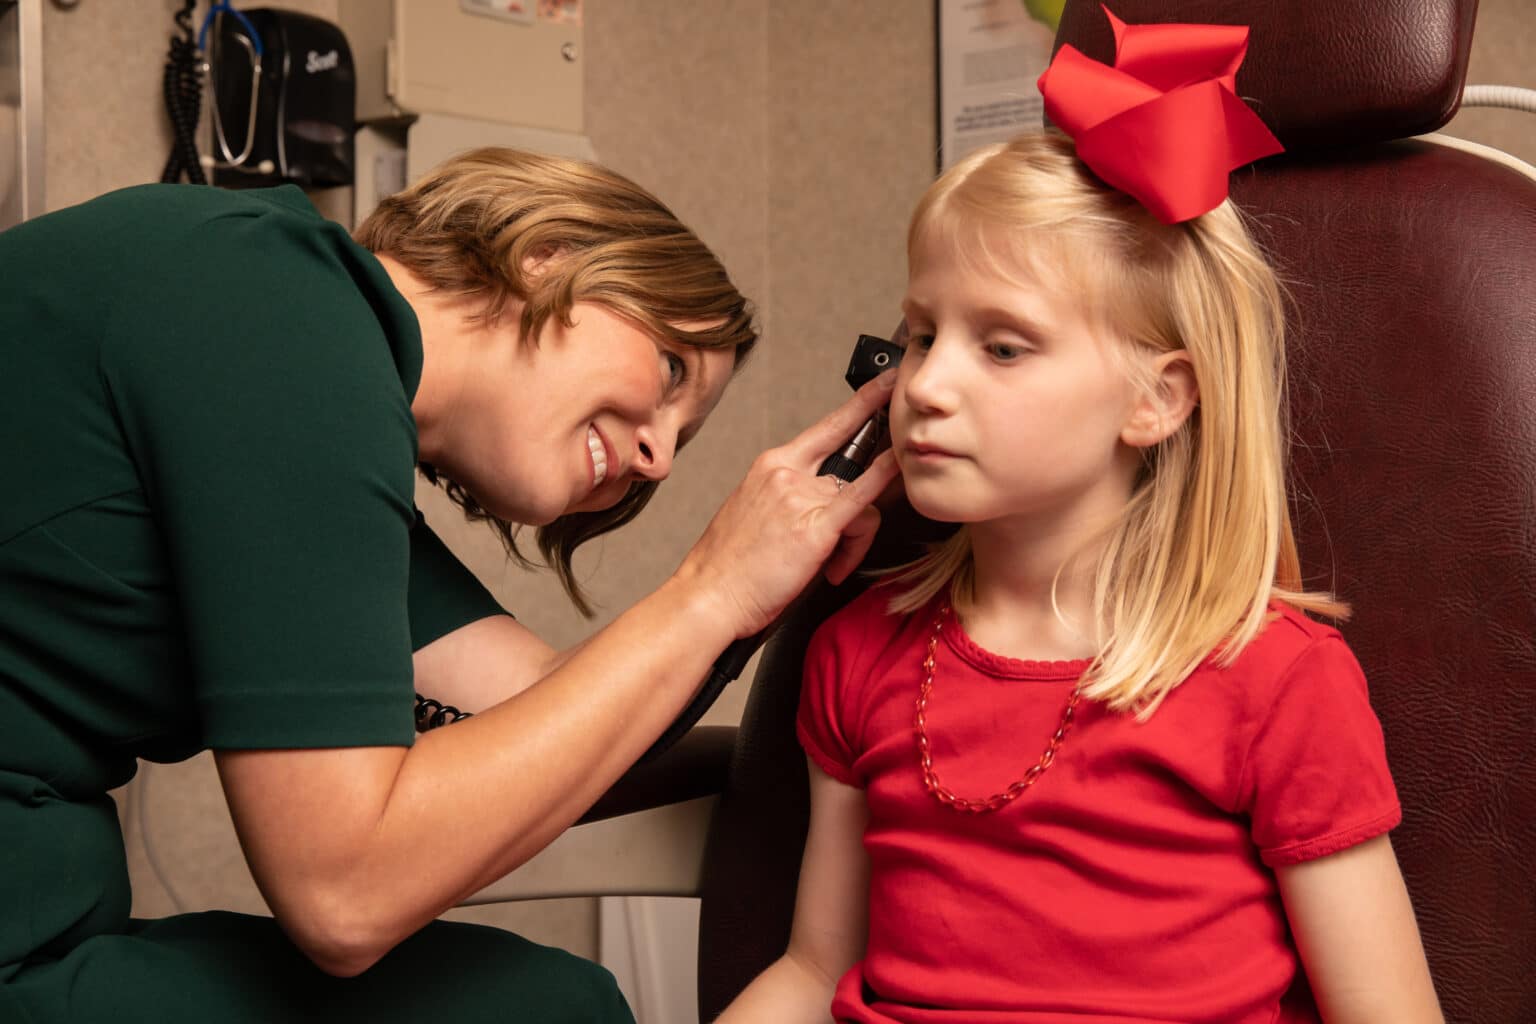 ENT examining a pediatric patients ear for signs of infection